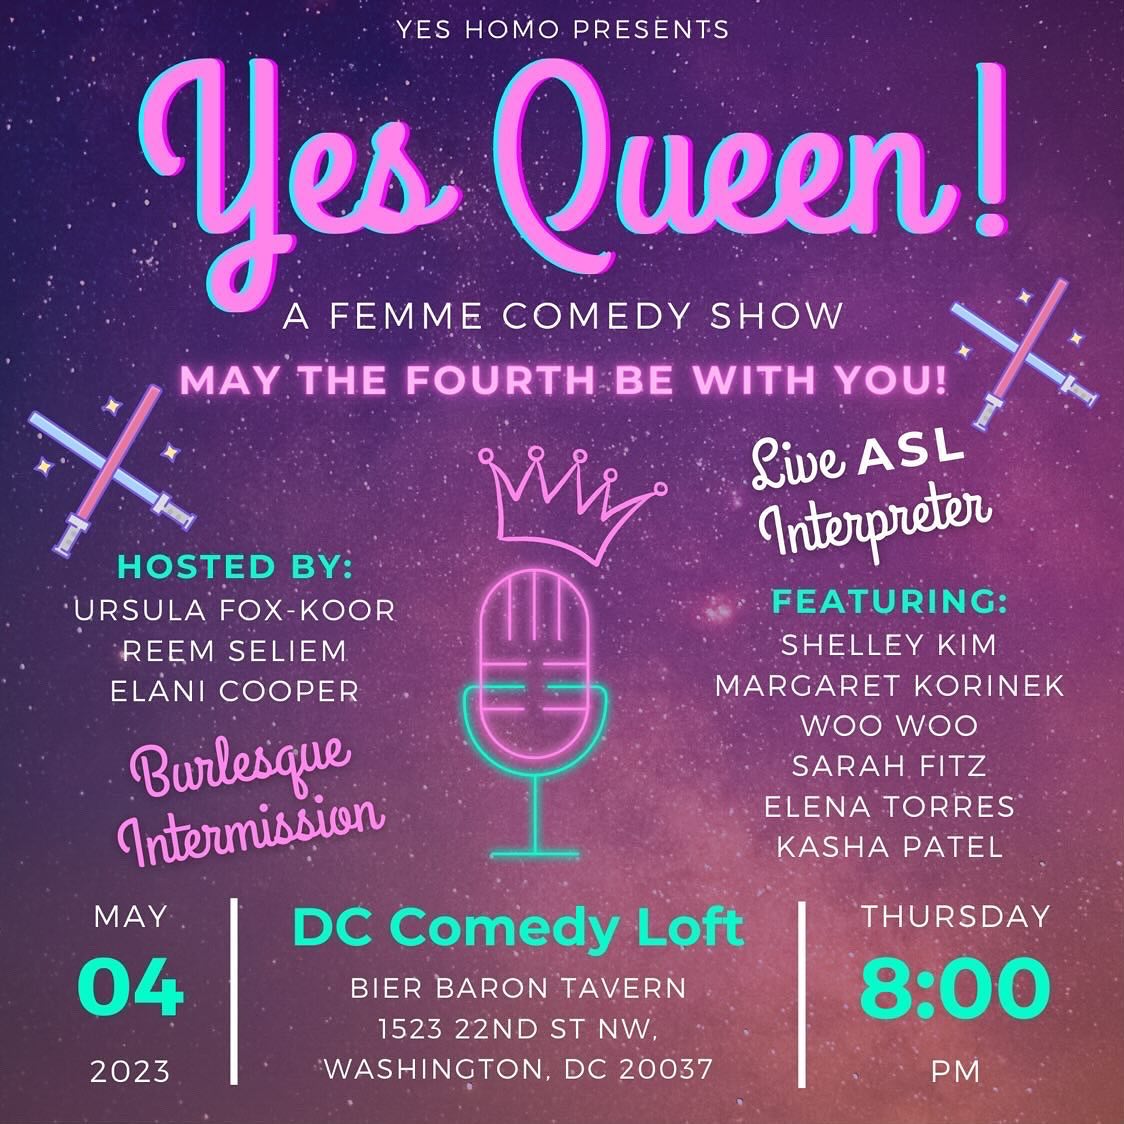 Yes Queen! A Femme Comedy Show – May the 4th Be With You Edition